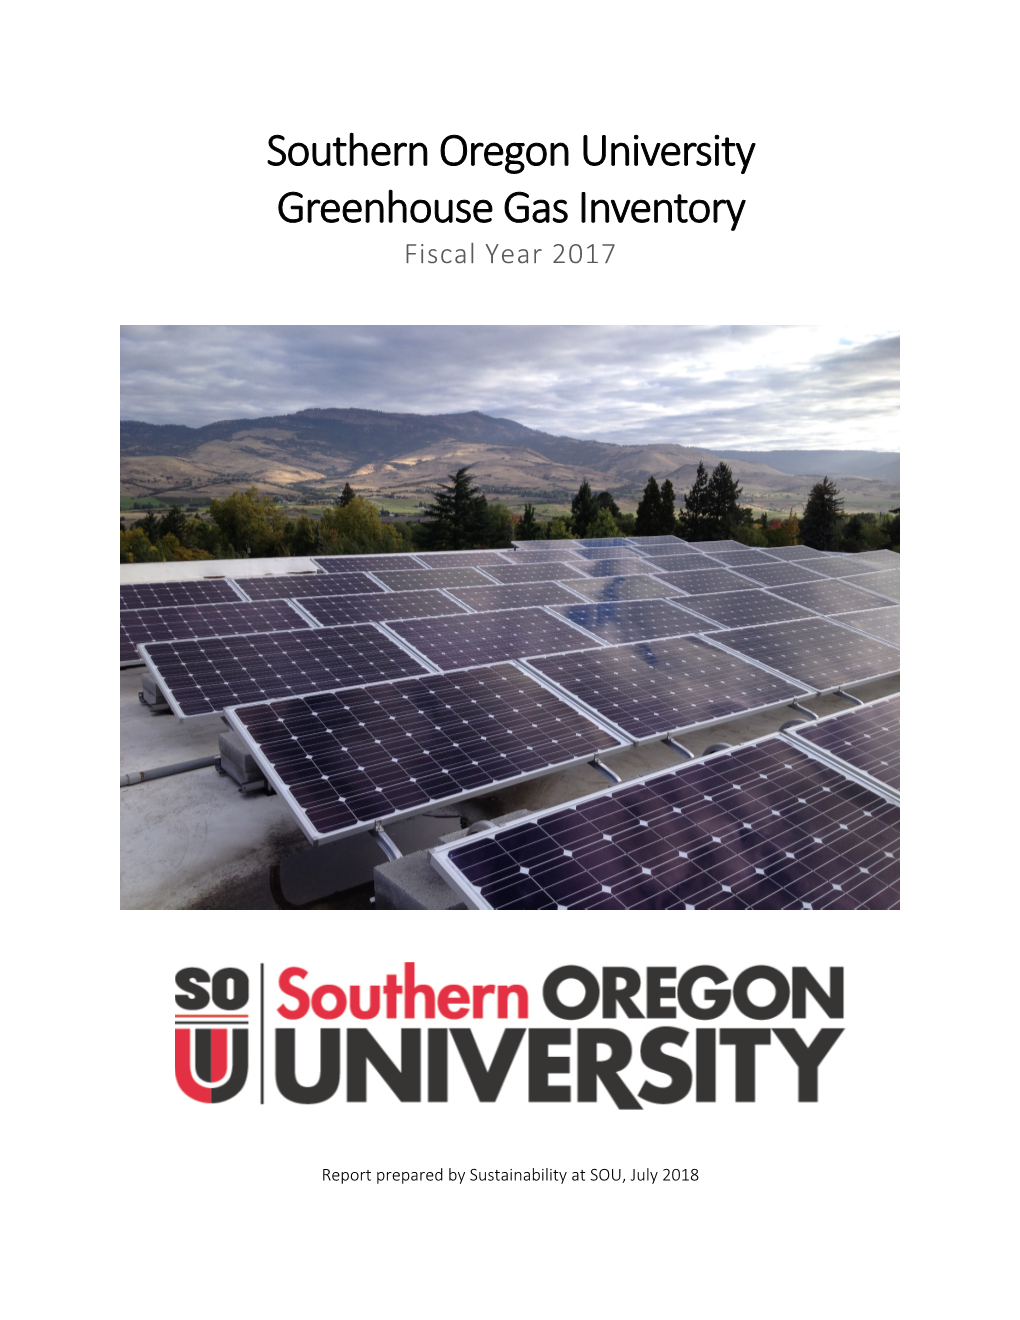 SOU 2017 Greenhouse Gas Inventory Report